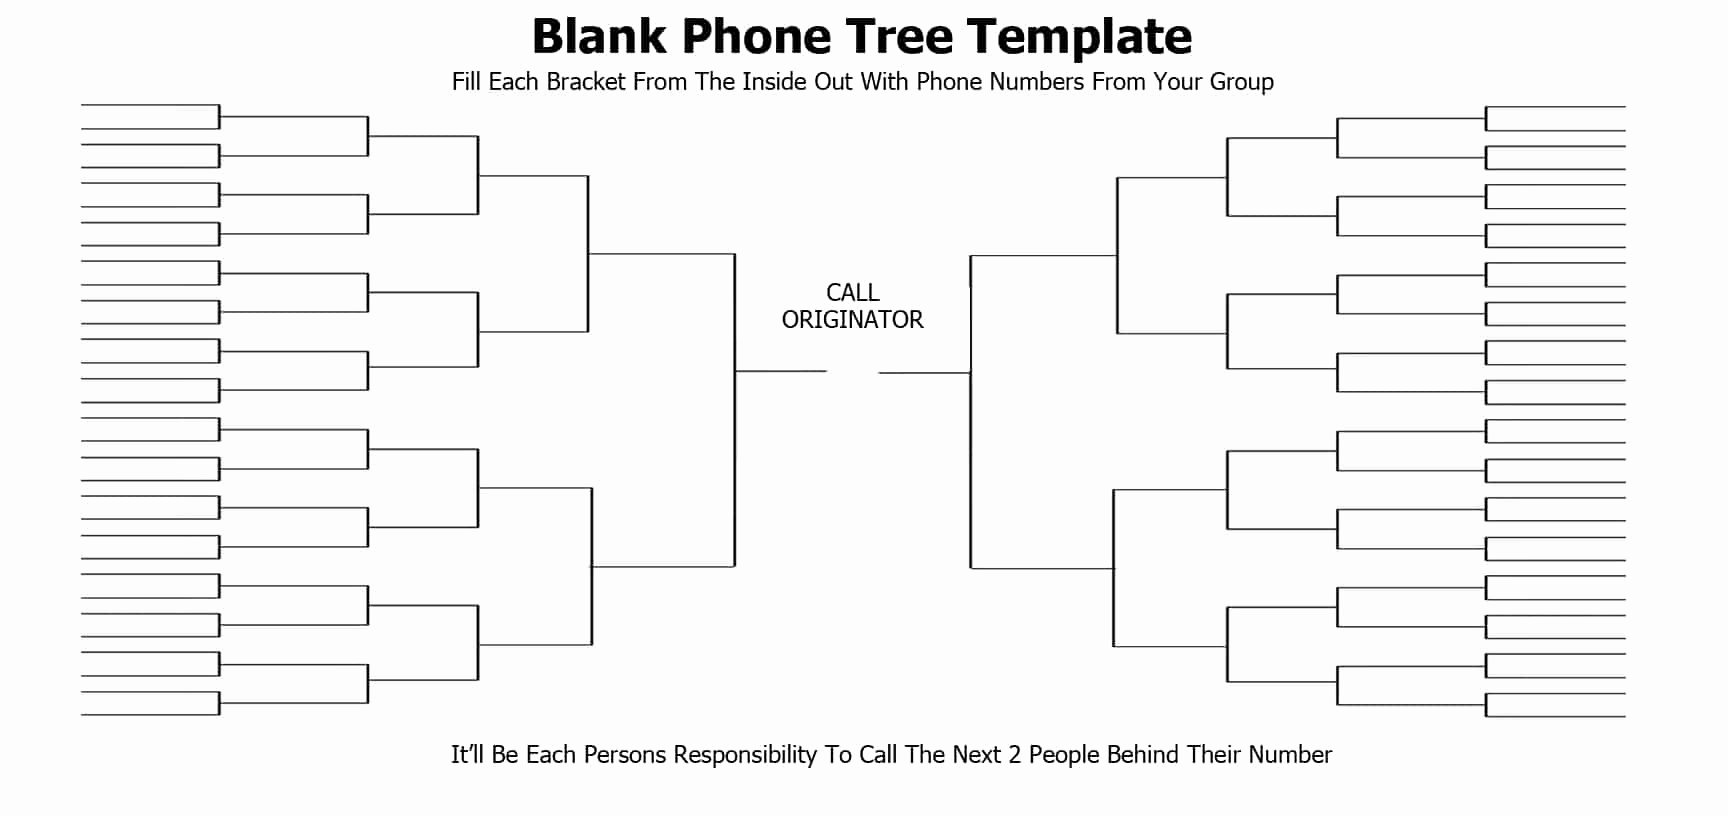 Emergency Phone Tree Template New 5 Free Phone Tree Templates Word Excel Pdf formats